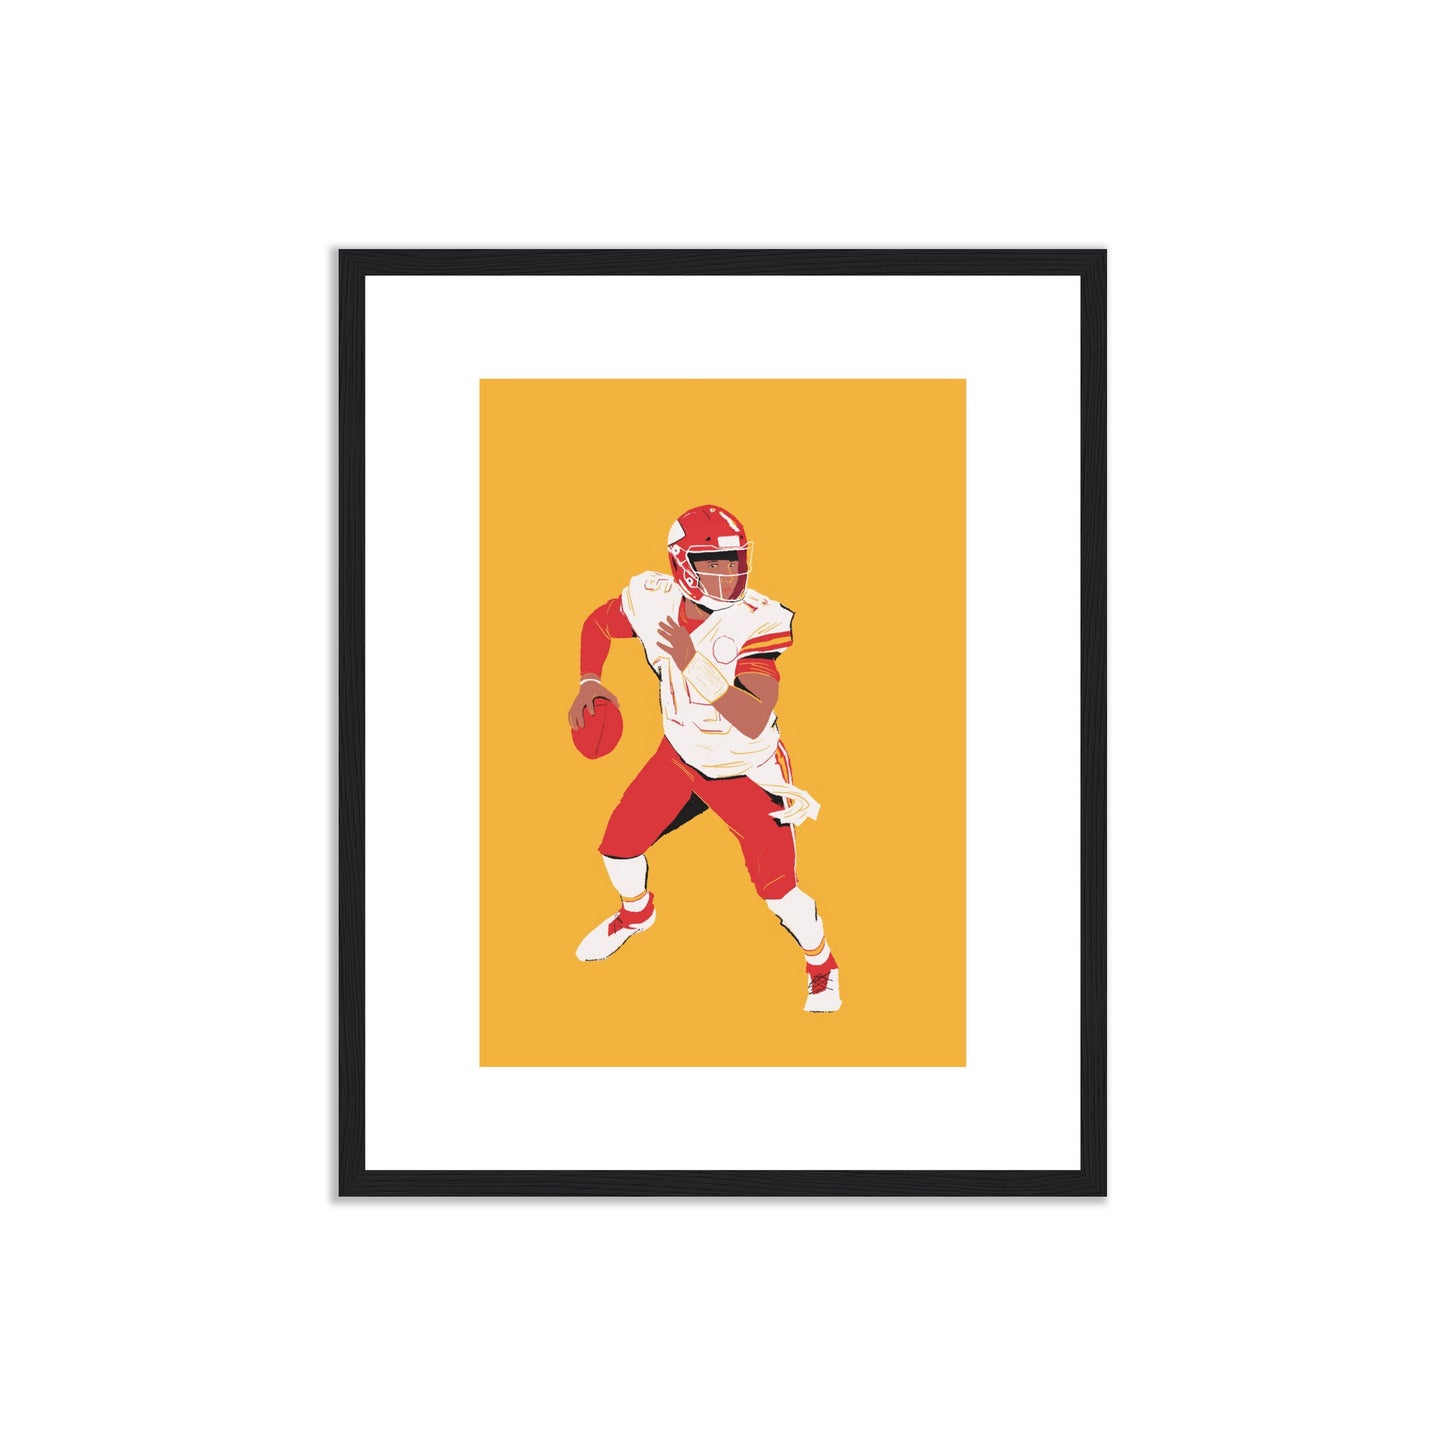 Finding The Moment - Patrick Mahomes Graphic Print